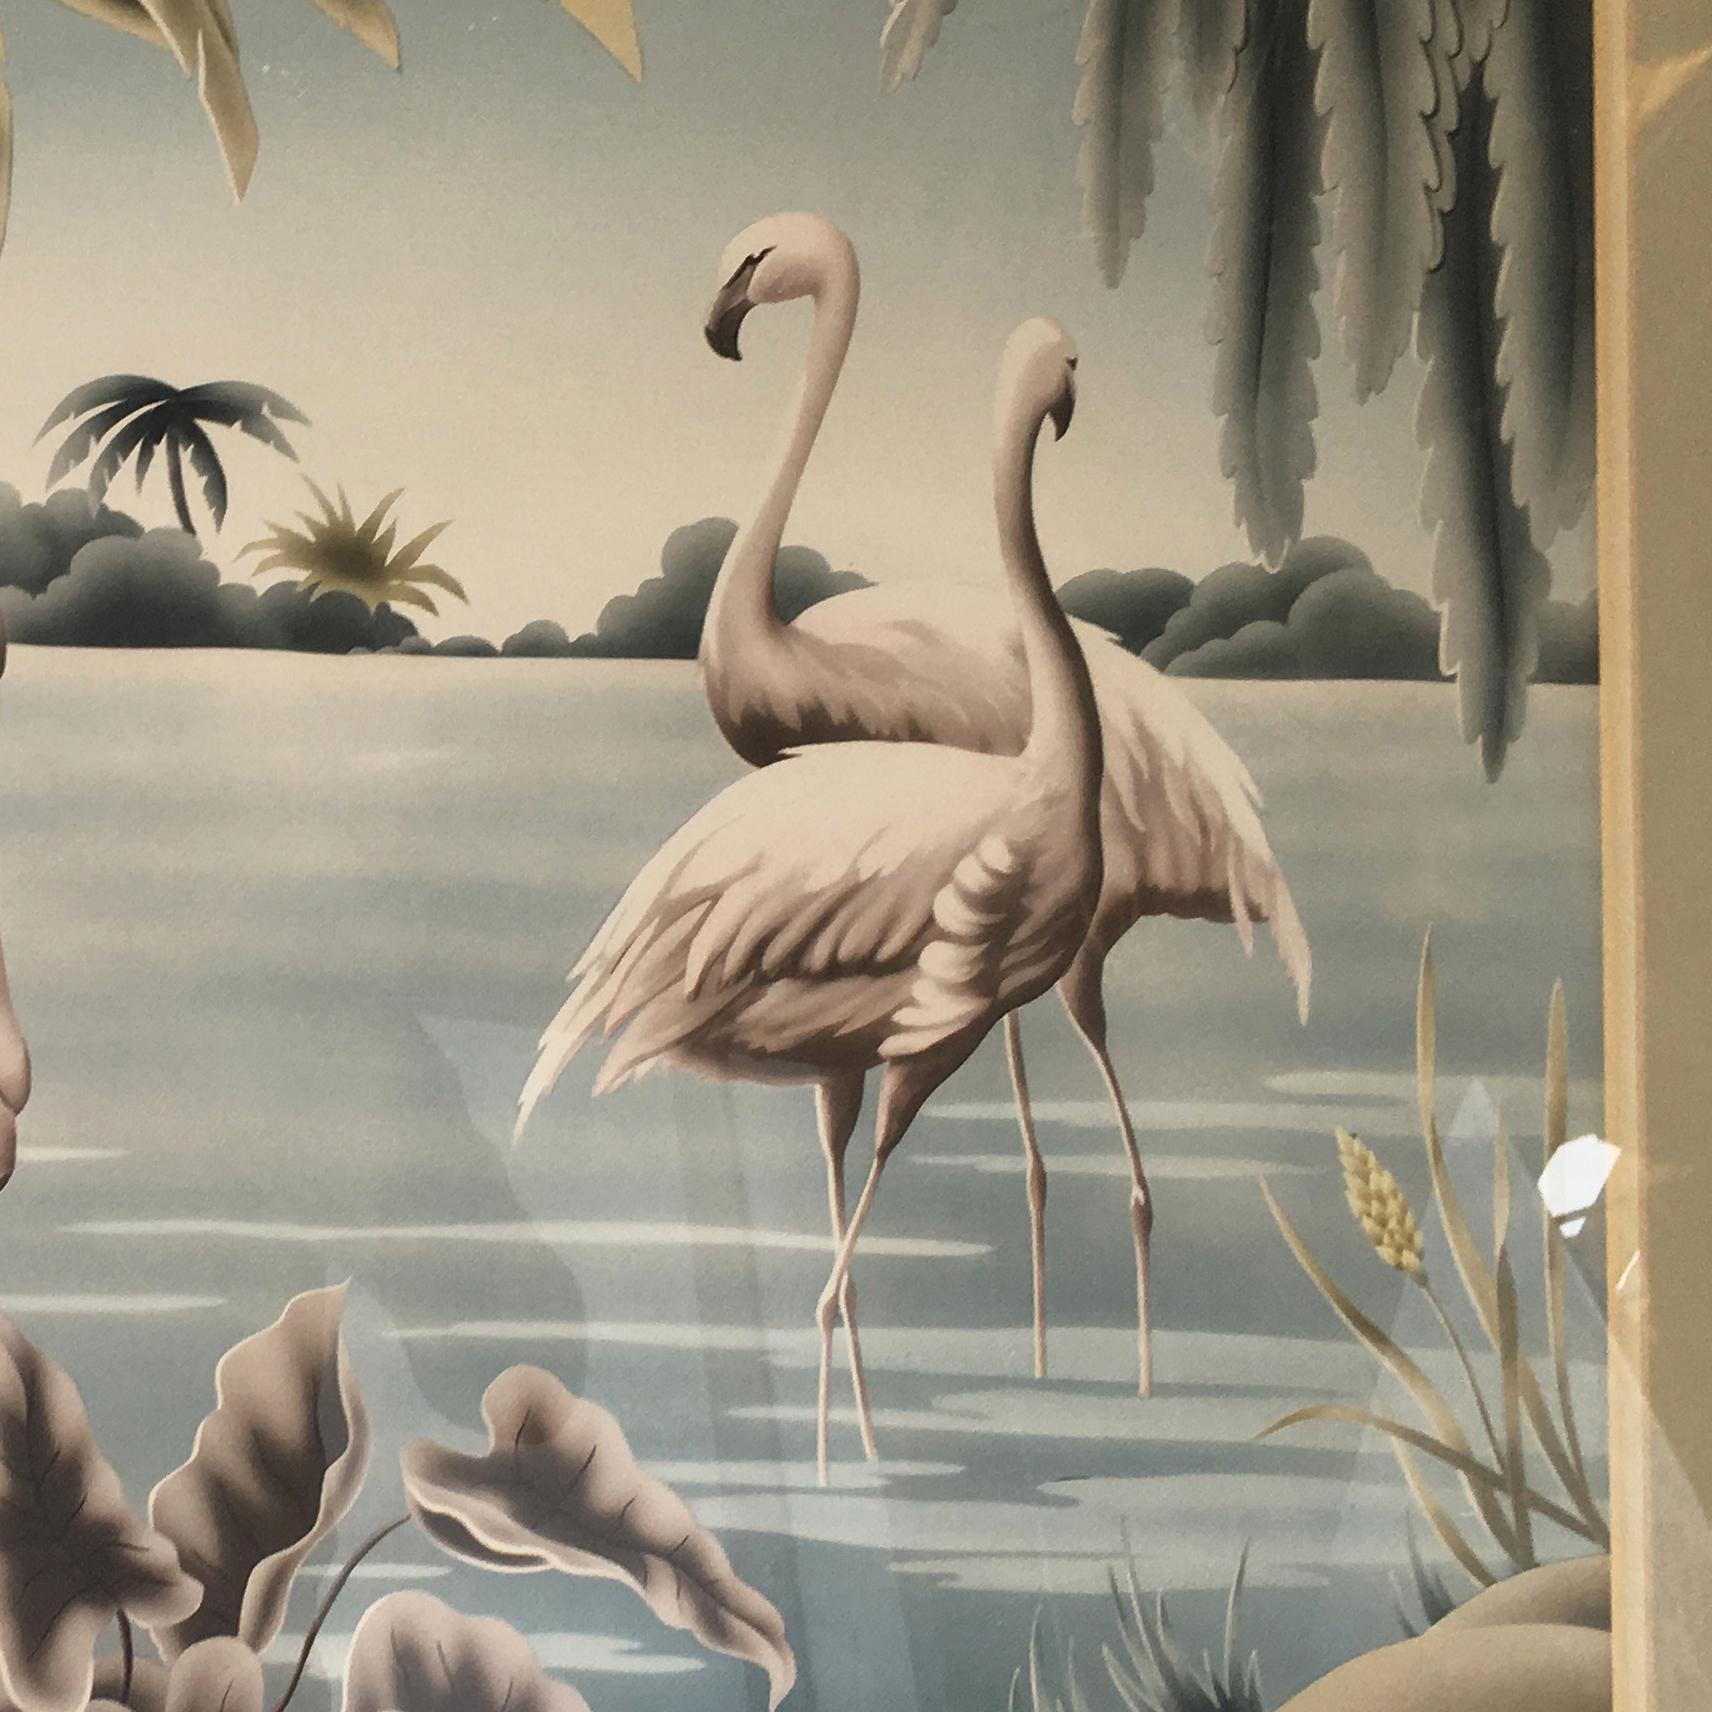 Original Airbrushed Flamingos (original airbrushed over a print) for the Turner Company, circa 1948 in the original hardwood frame carved into a bamboo shape. A great example of the post-WWII Hawaiian and tropical art/decorating boom. Great for